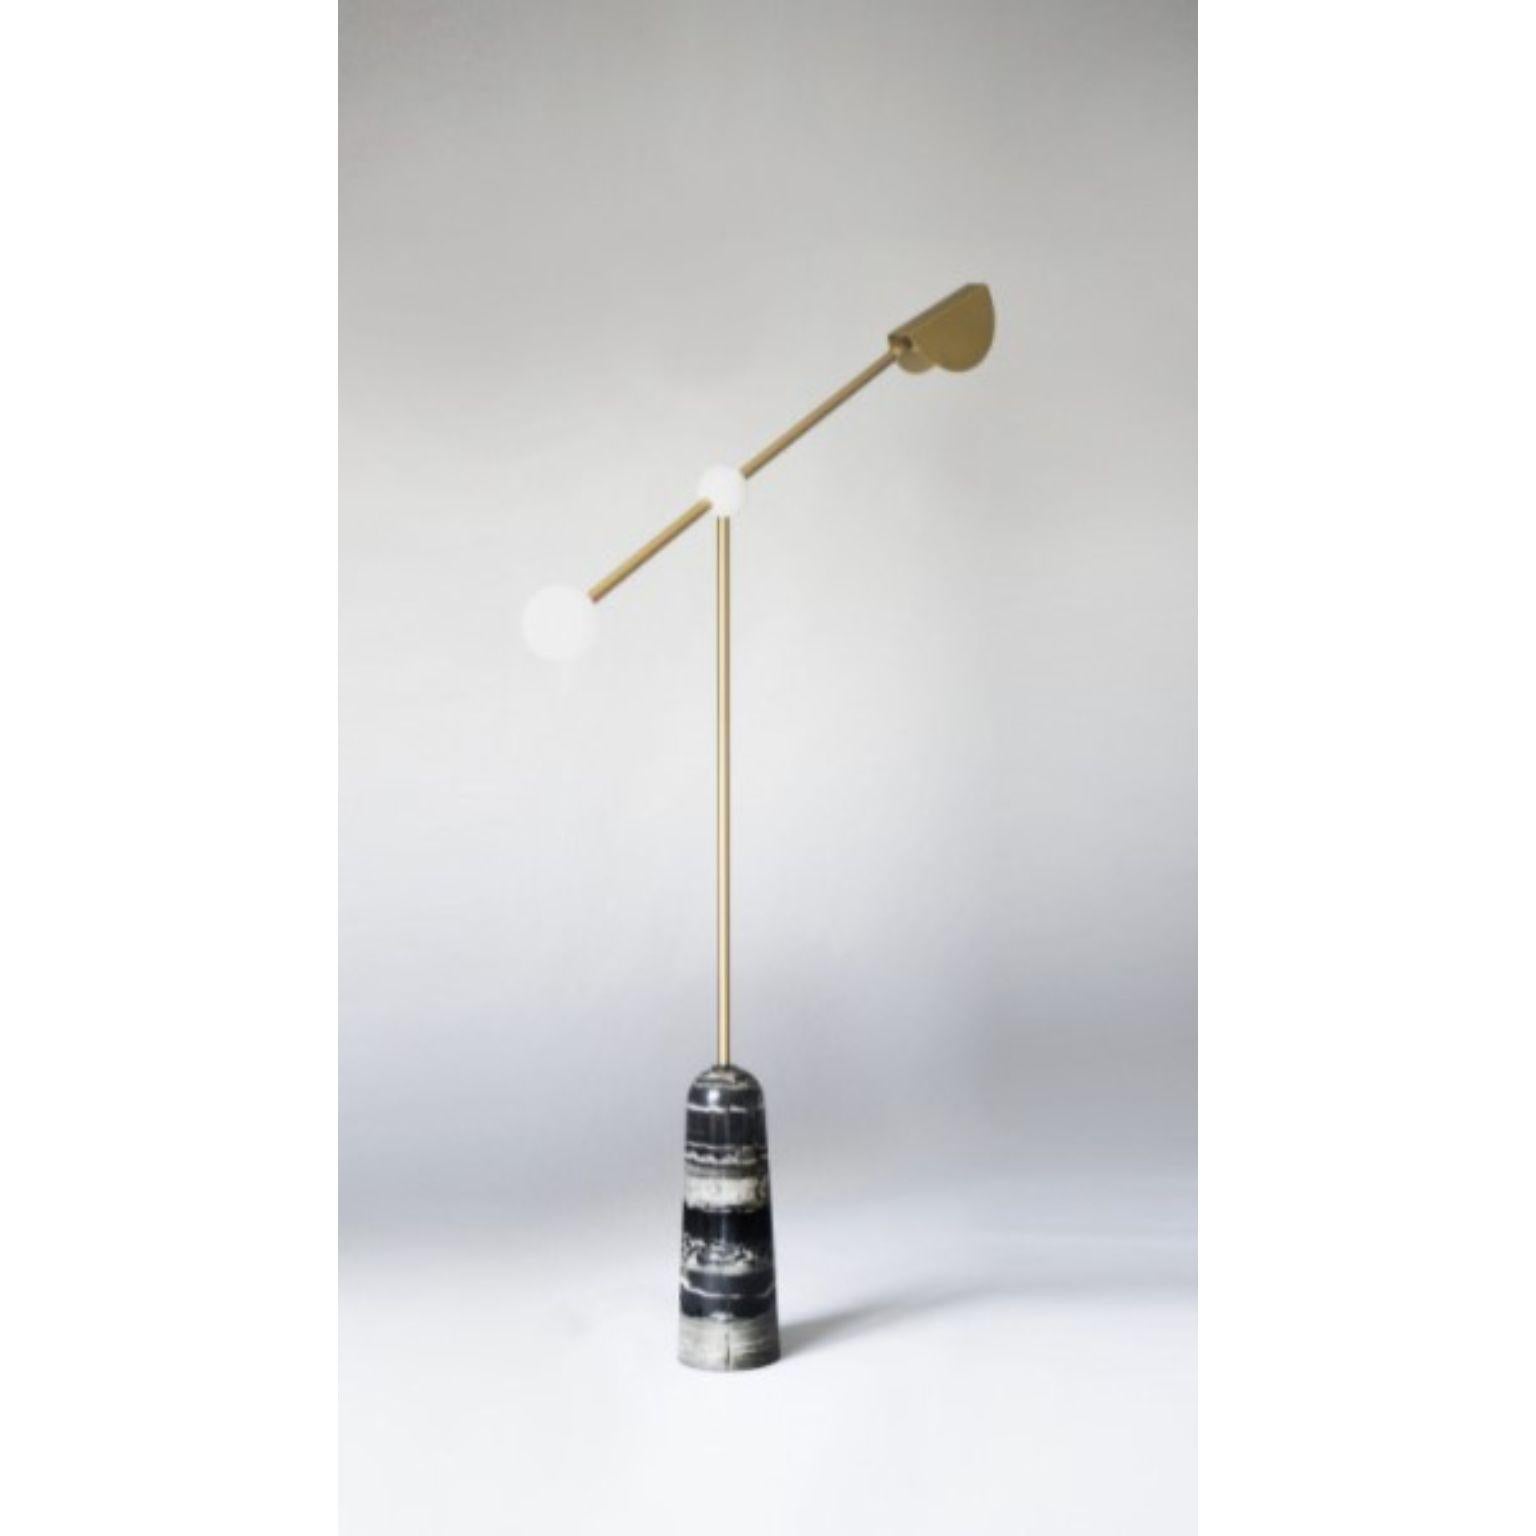 Balance floor lamp by Square in Circle
Dimensions: D 40 x H 147 cm
Materials:Brushed brass / white frosted glass / white powder coated metal / honed black
Other finishes available.

An elegant and minimal floor lamp with a rounded tapered black